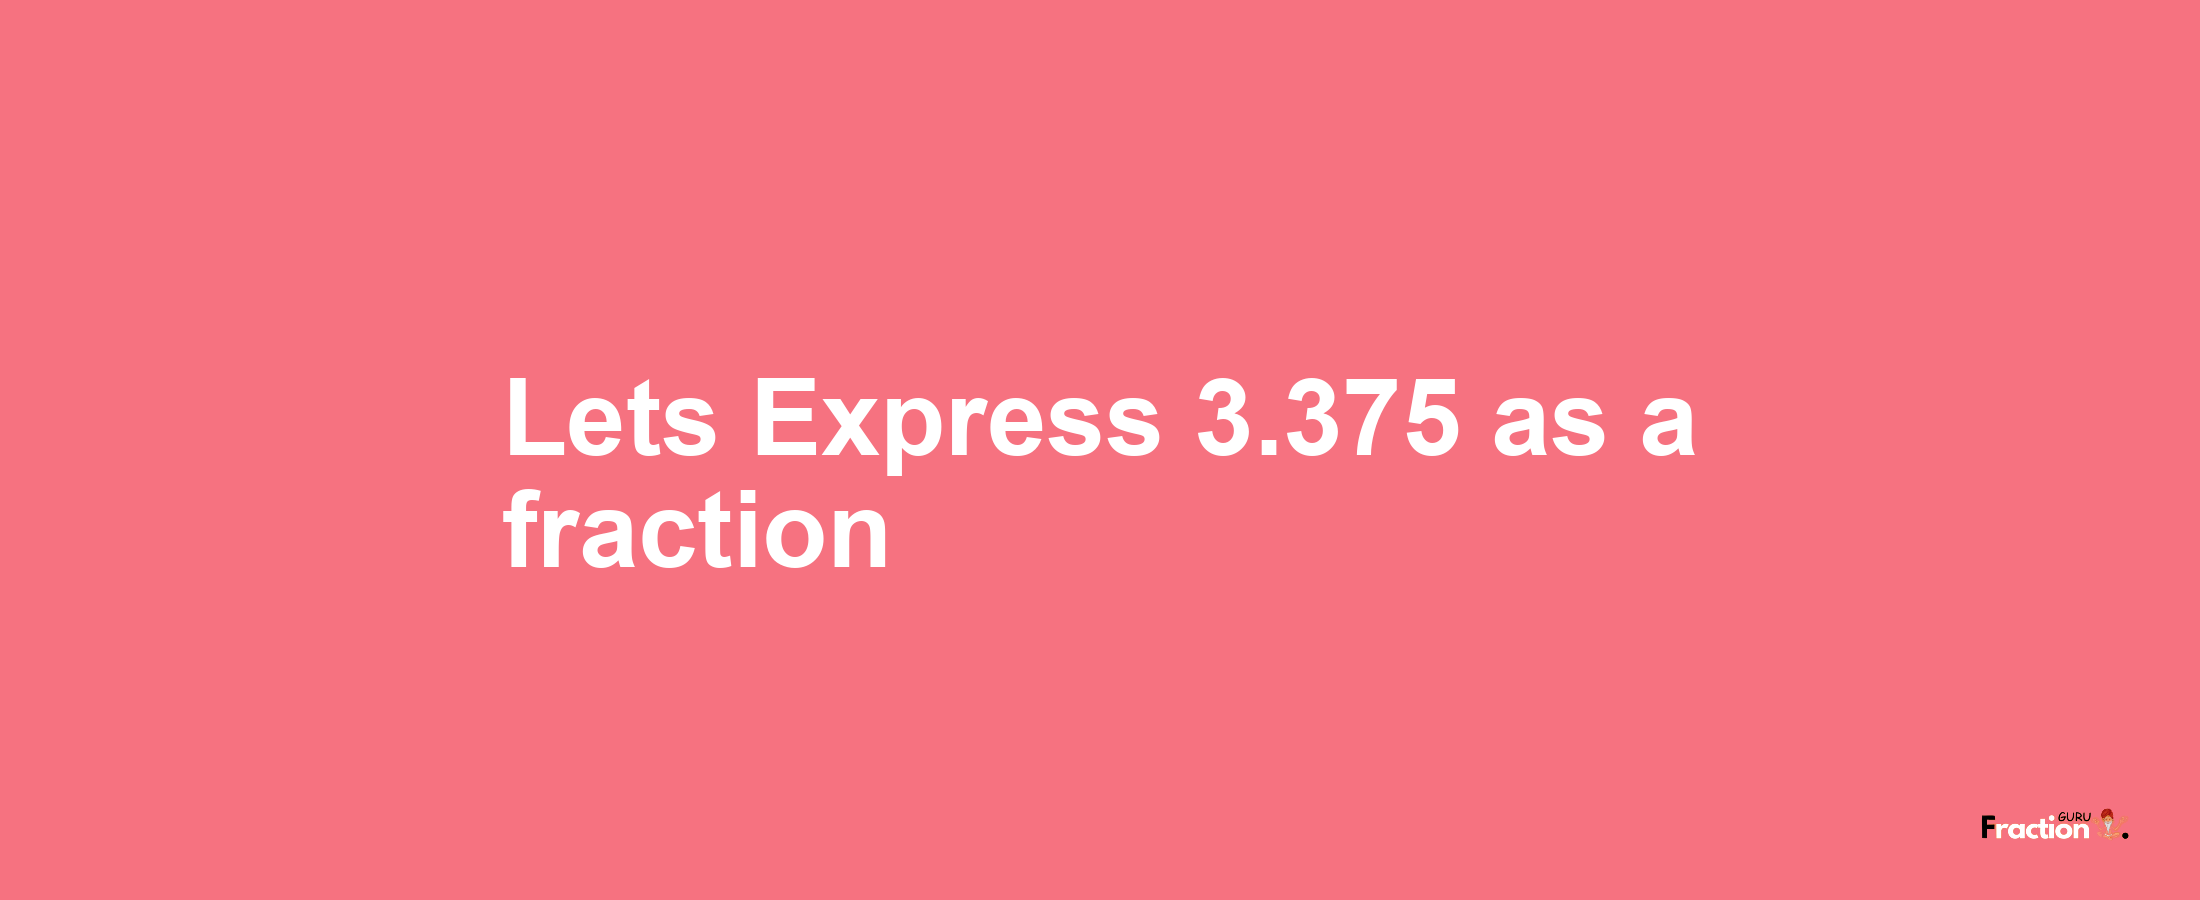 Lets Express 3.375 as afraction